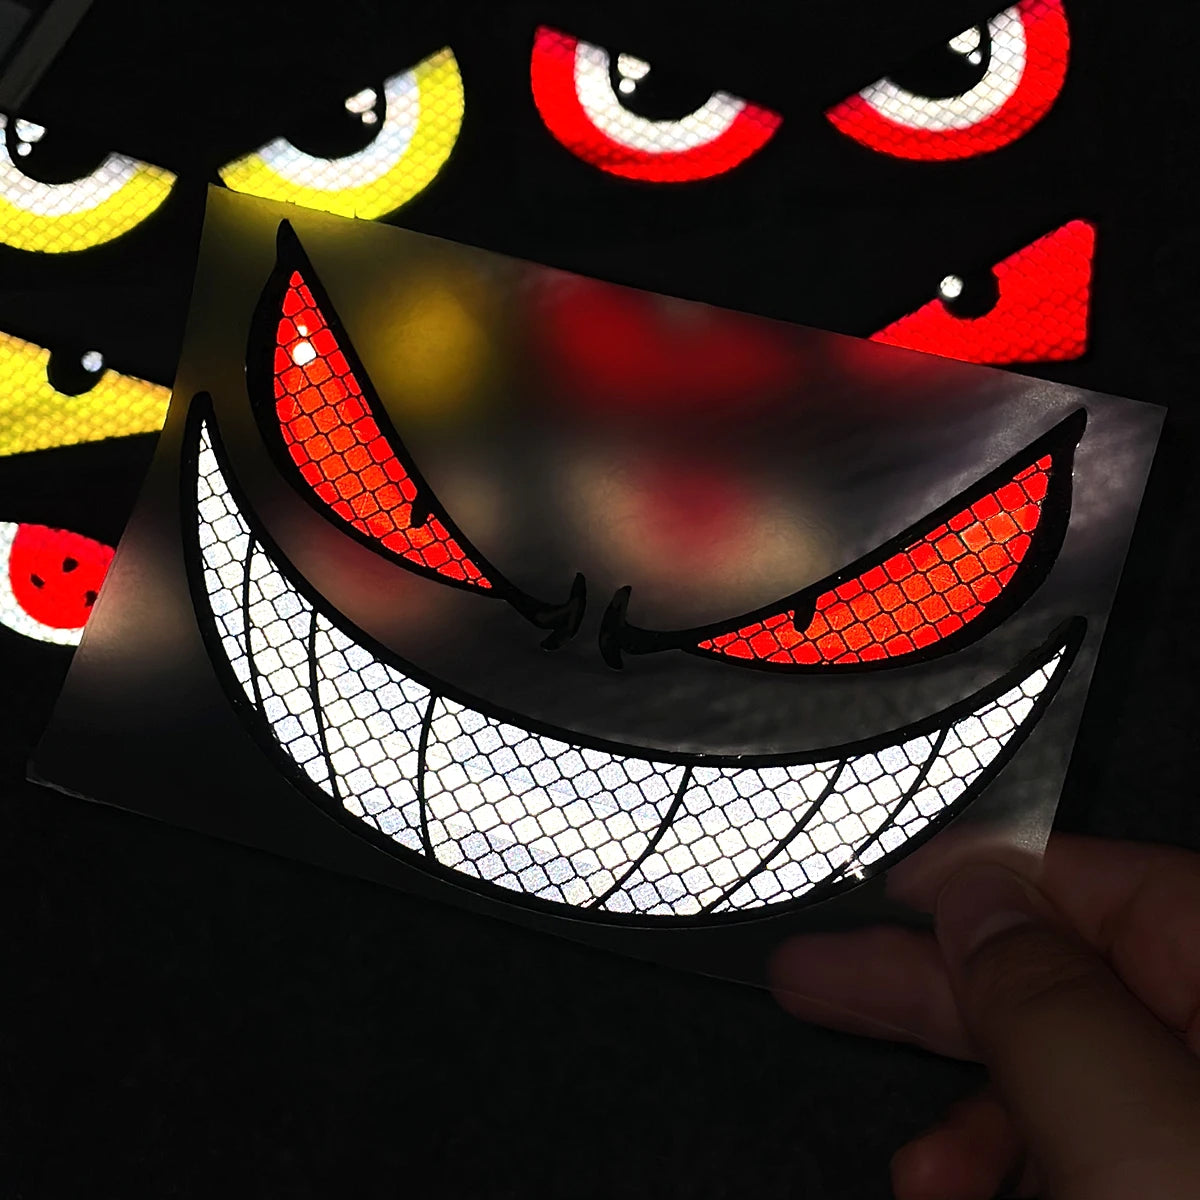 Grin Eyes Reflective Motorcycle Safety Warning Stickers Decor Moto Bike Scooter Body Windshield Helmet Tailbox Decal Accessories